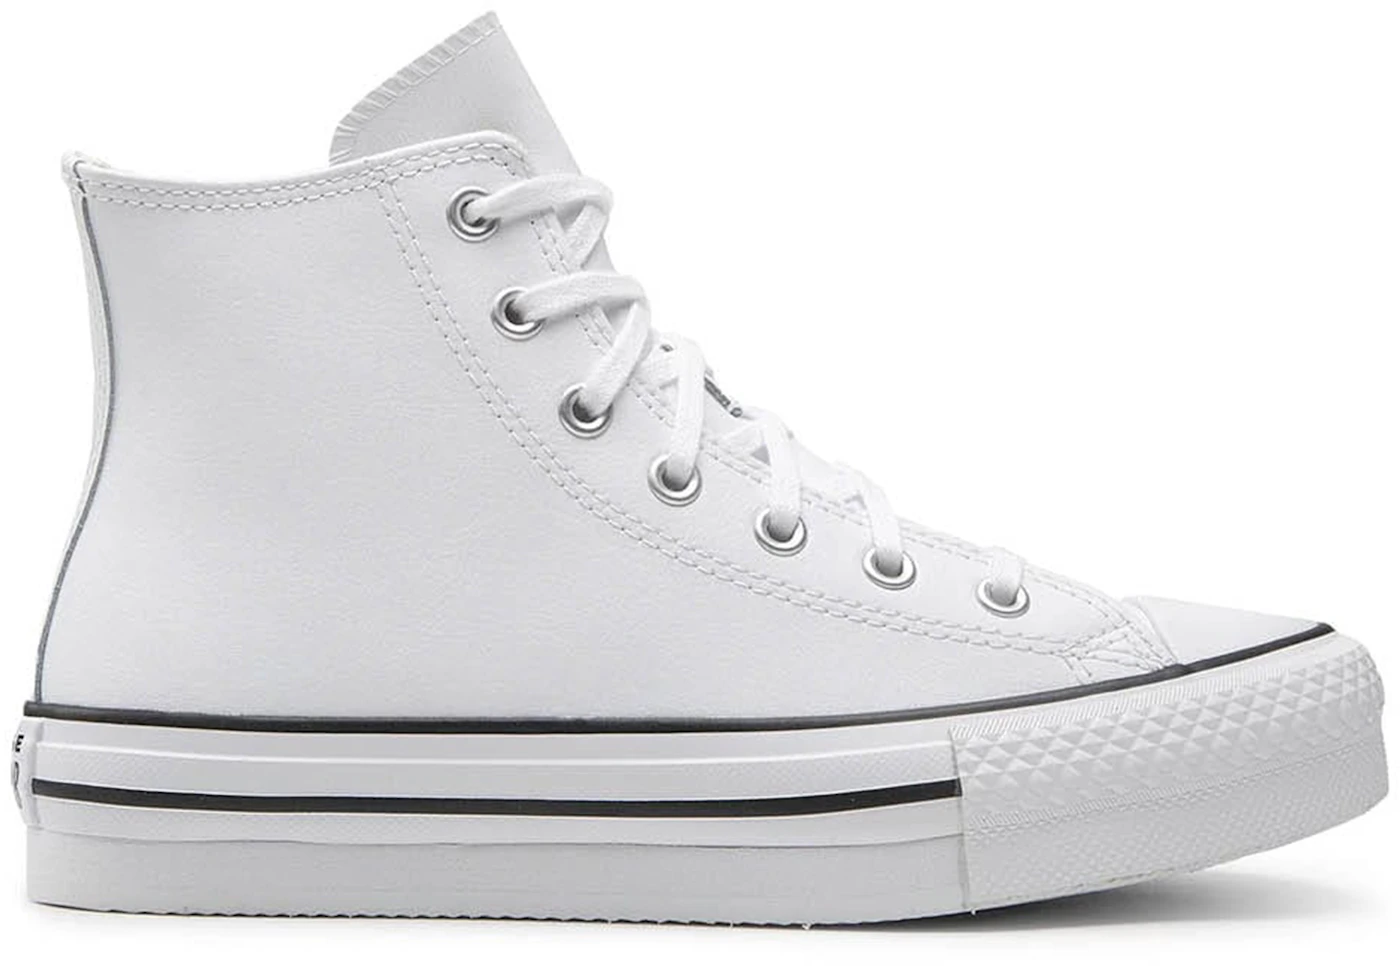 Converse Chuck Taylor All Star Eva Lift Hi Leather White Natural Ivory -  A02486C - US